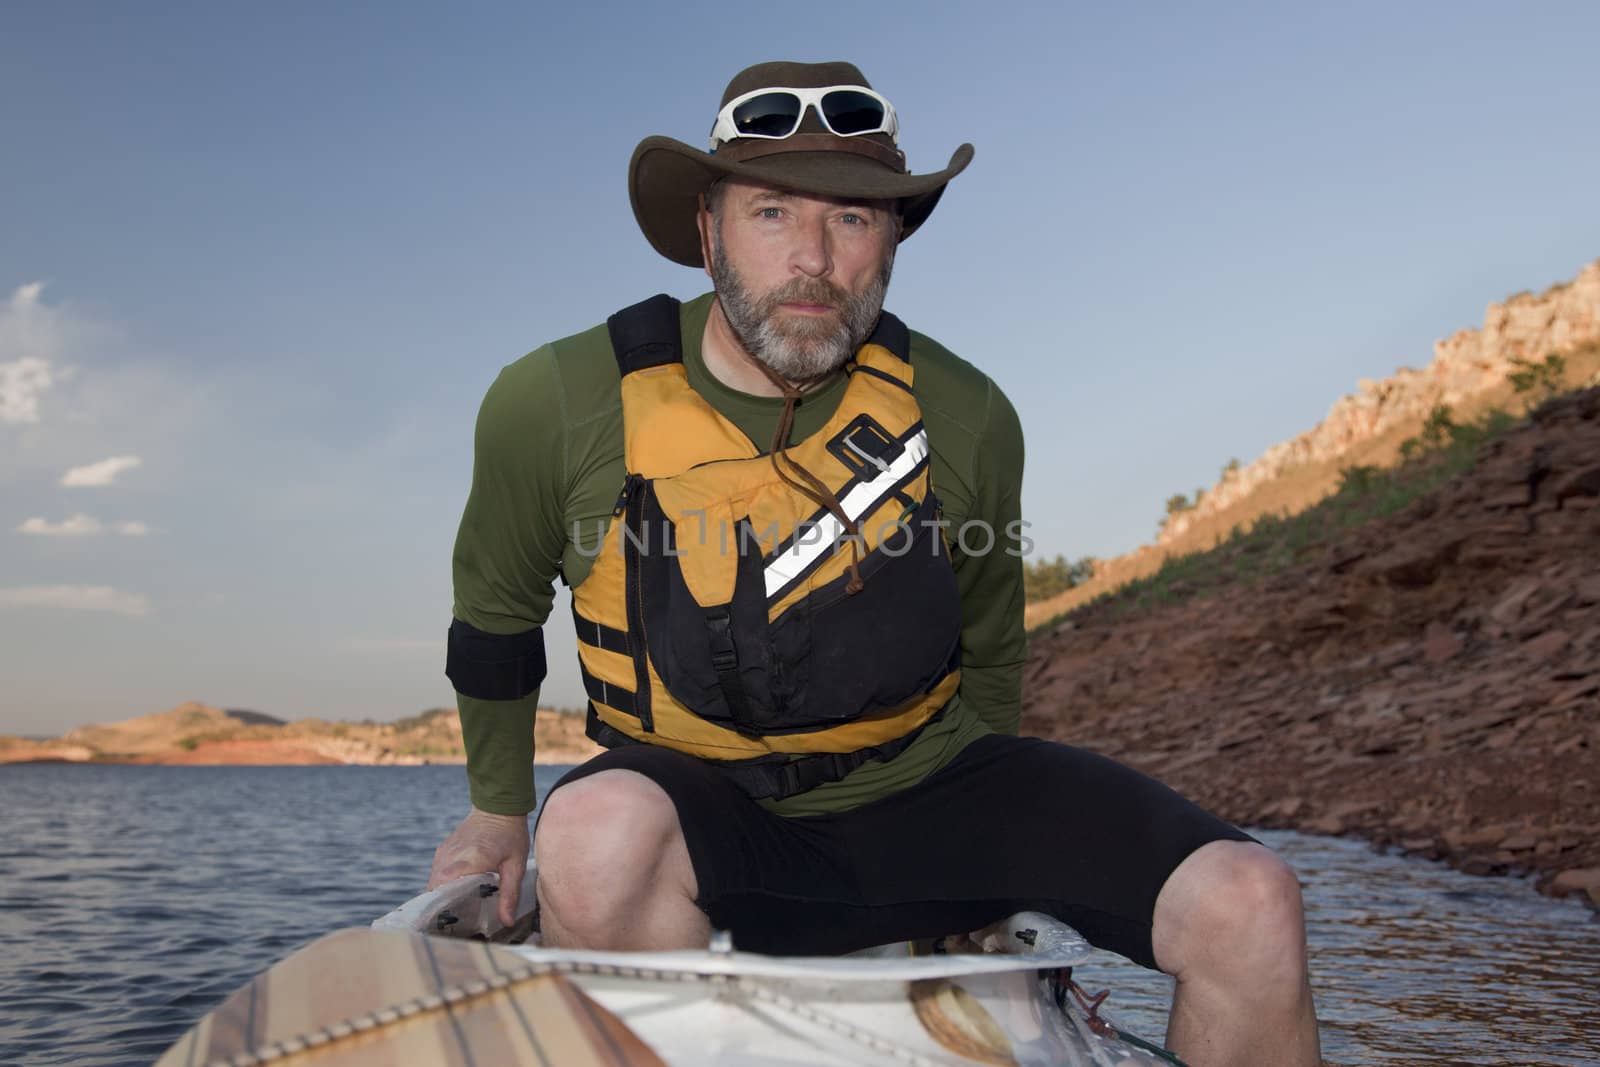 mature male boarding his canoe on a mountain lake with red sandstone cliffs (Horsetooth Reservoir near Fort Collins, Colorado)